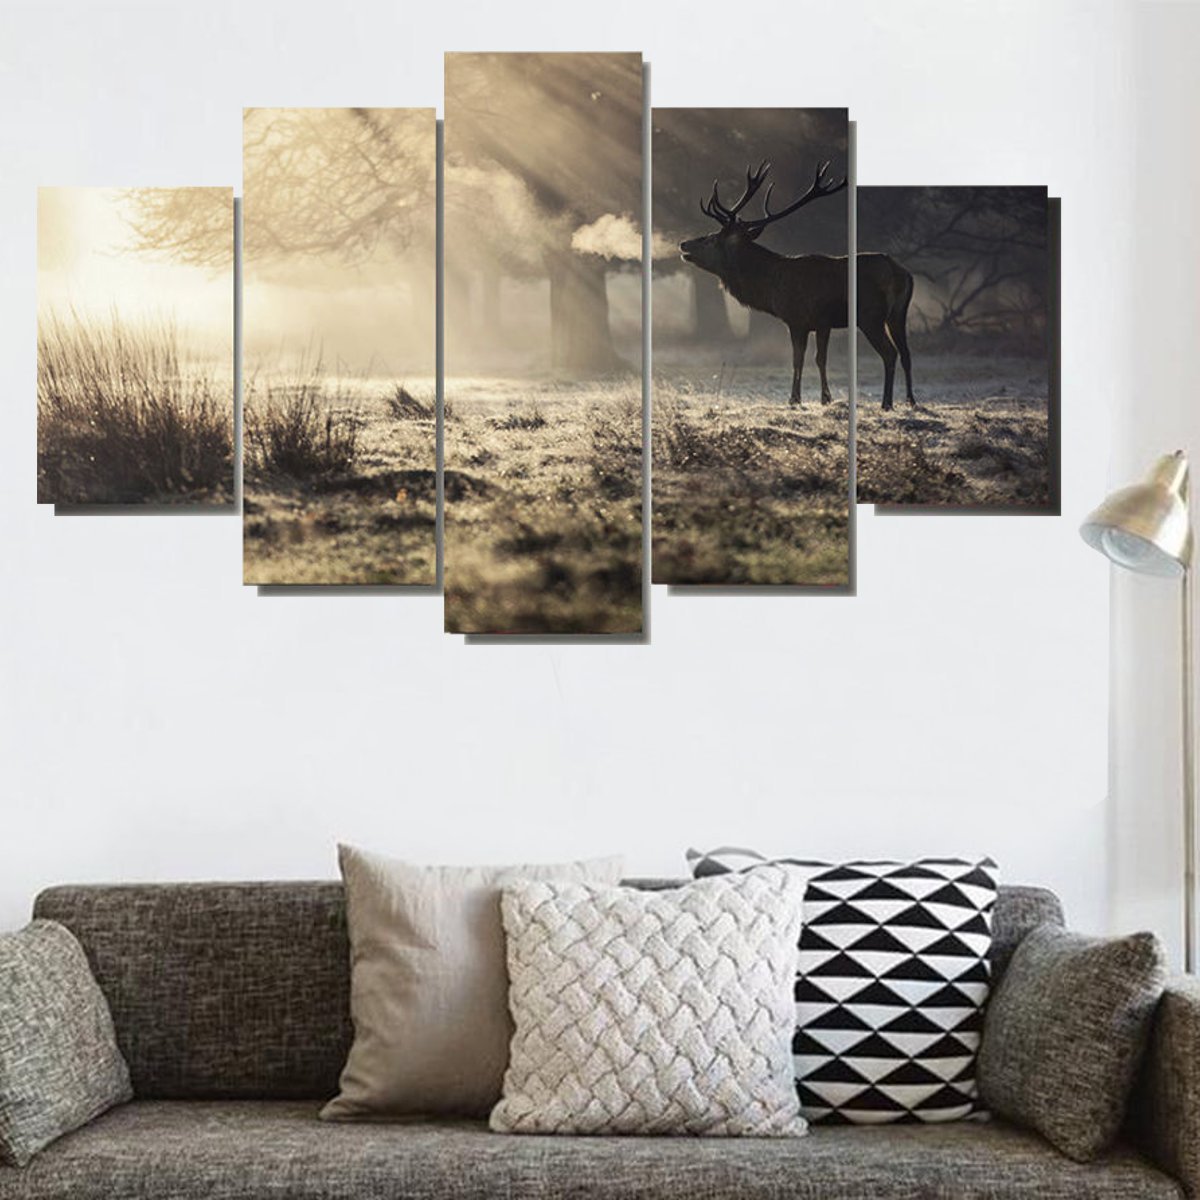 Elk-Art-Oil-Paintings-Modern-Style-Canvas-Print-Wall-Unframed-Pictures-Home-Decor-1636997-1